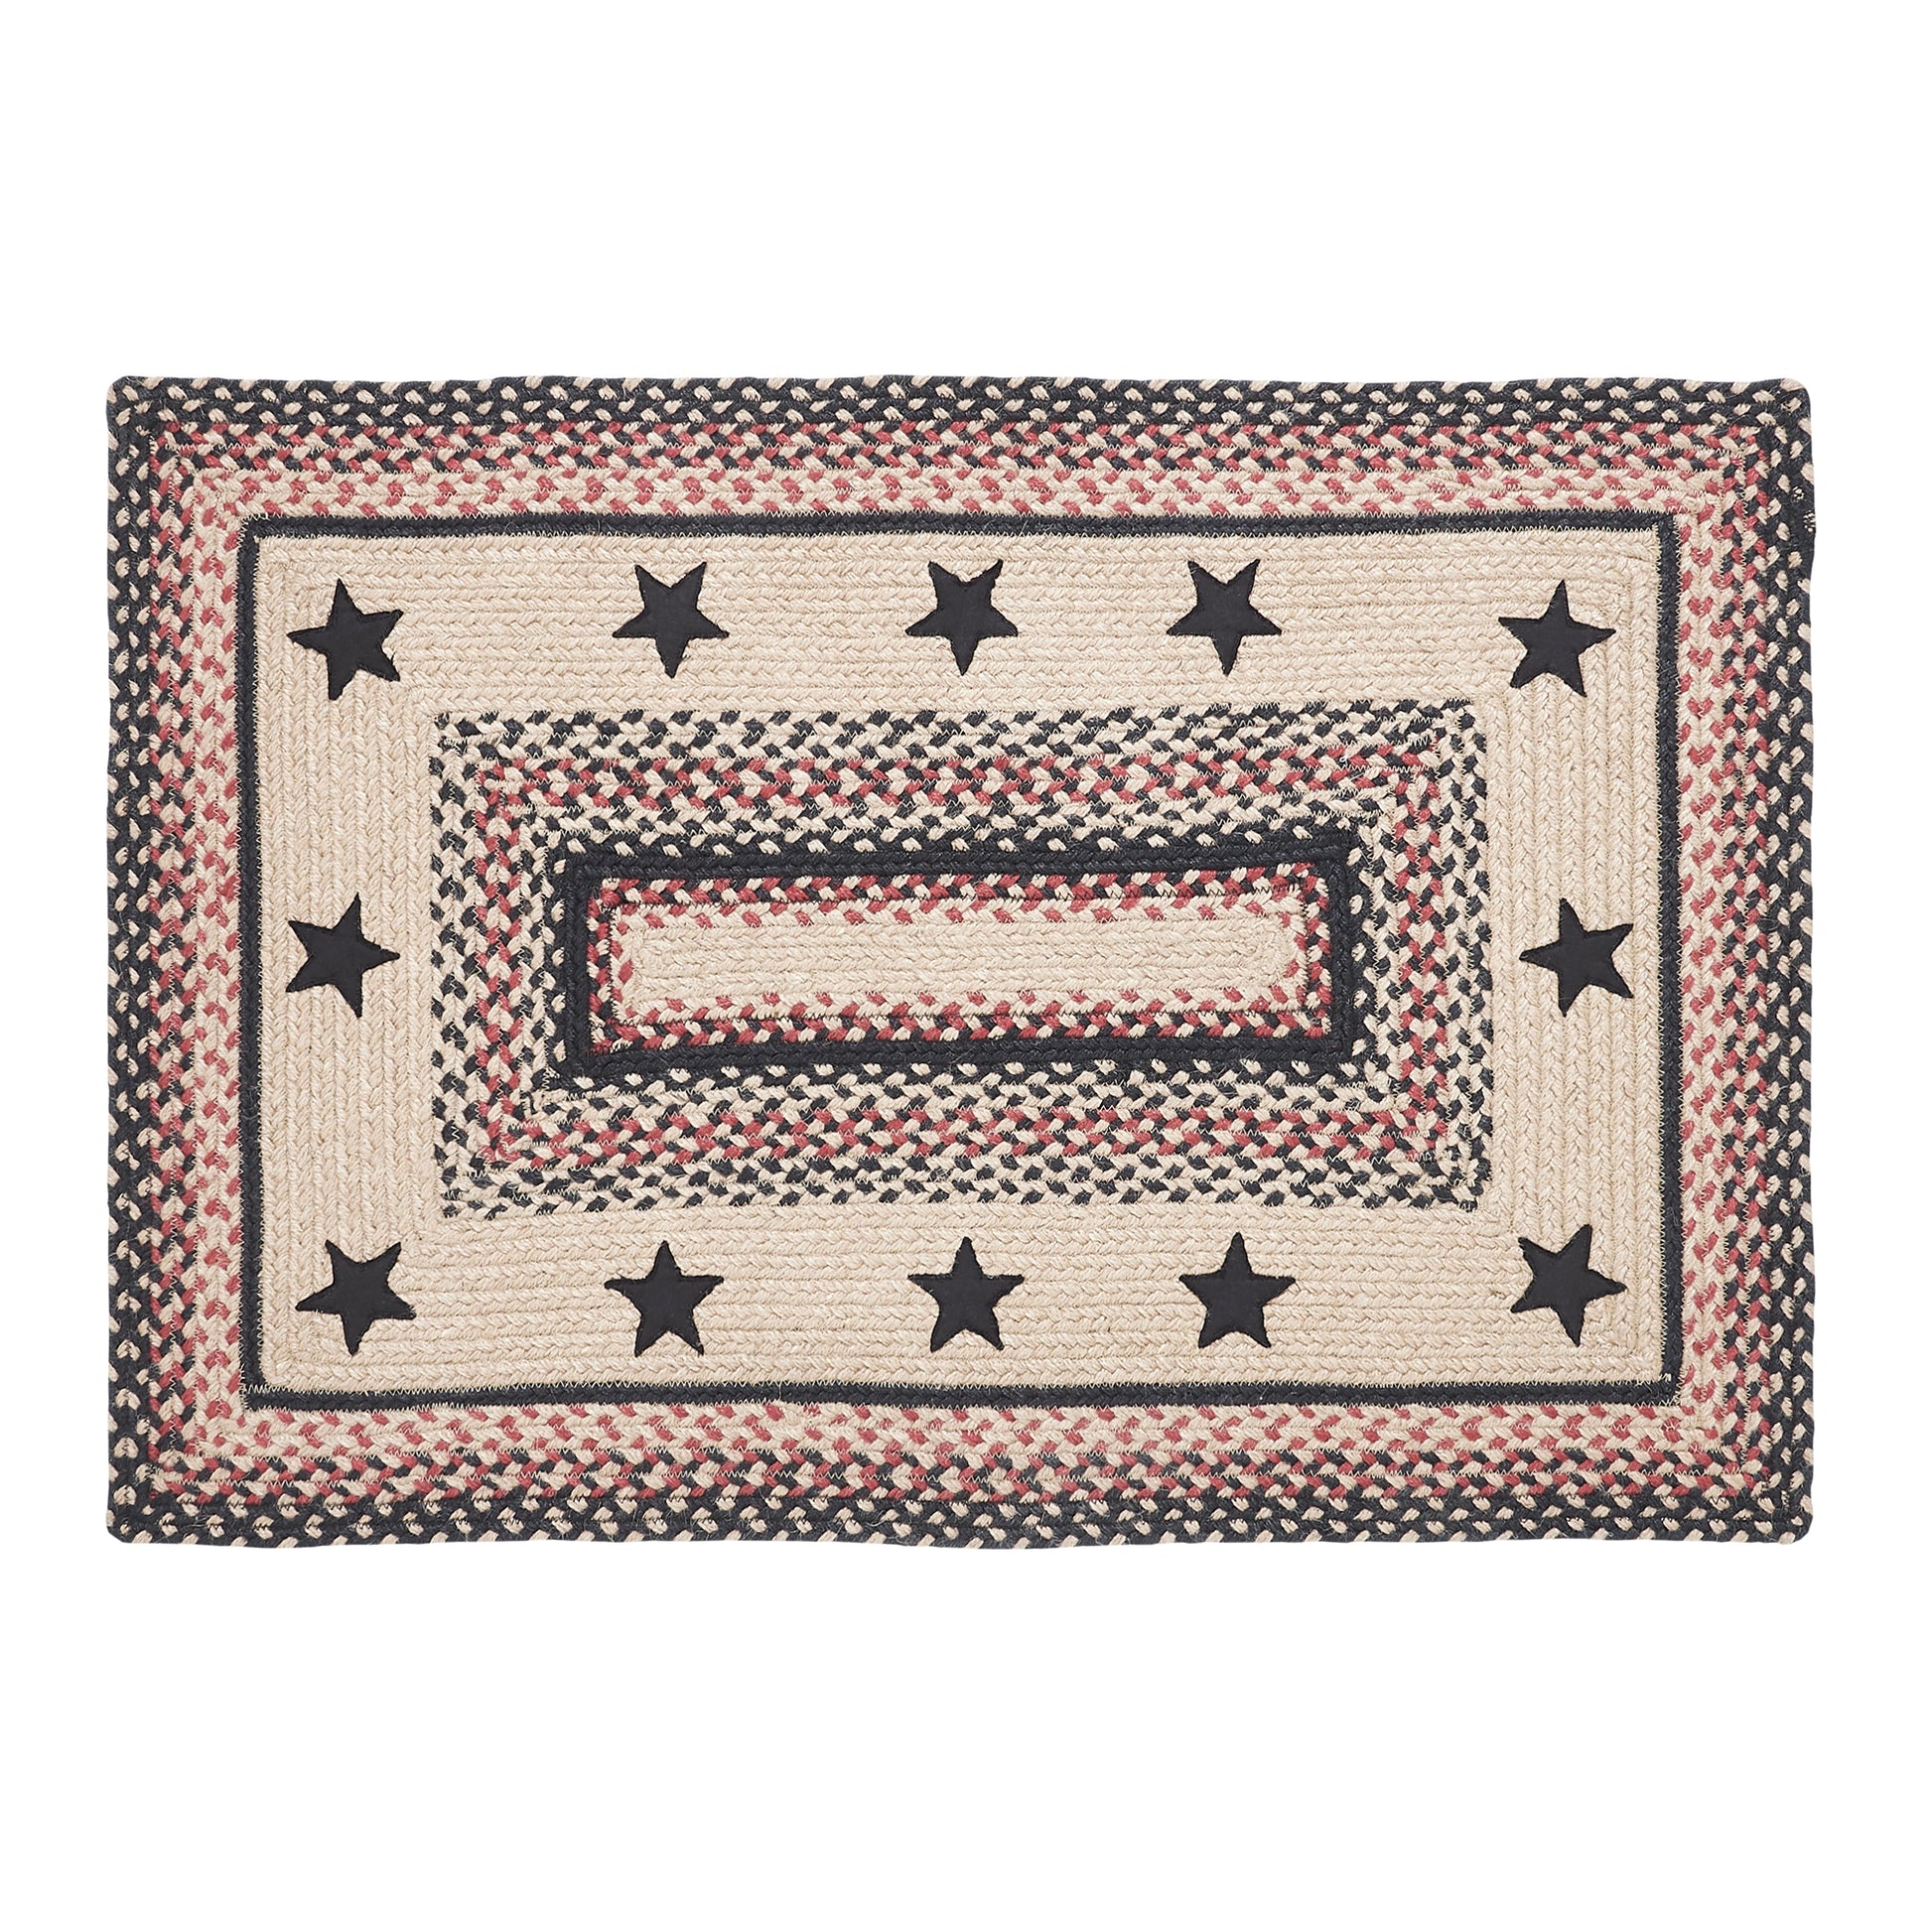 81334-Colonial-Star-Jute-Rug-Rect-w-Pad-24x36-image-6